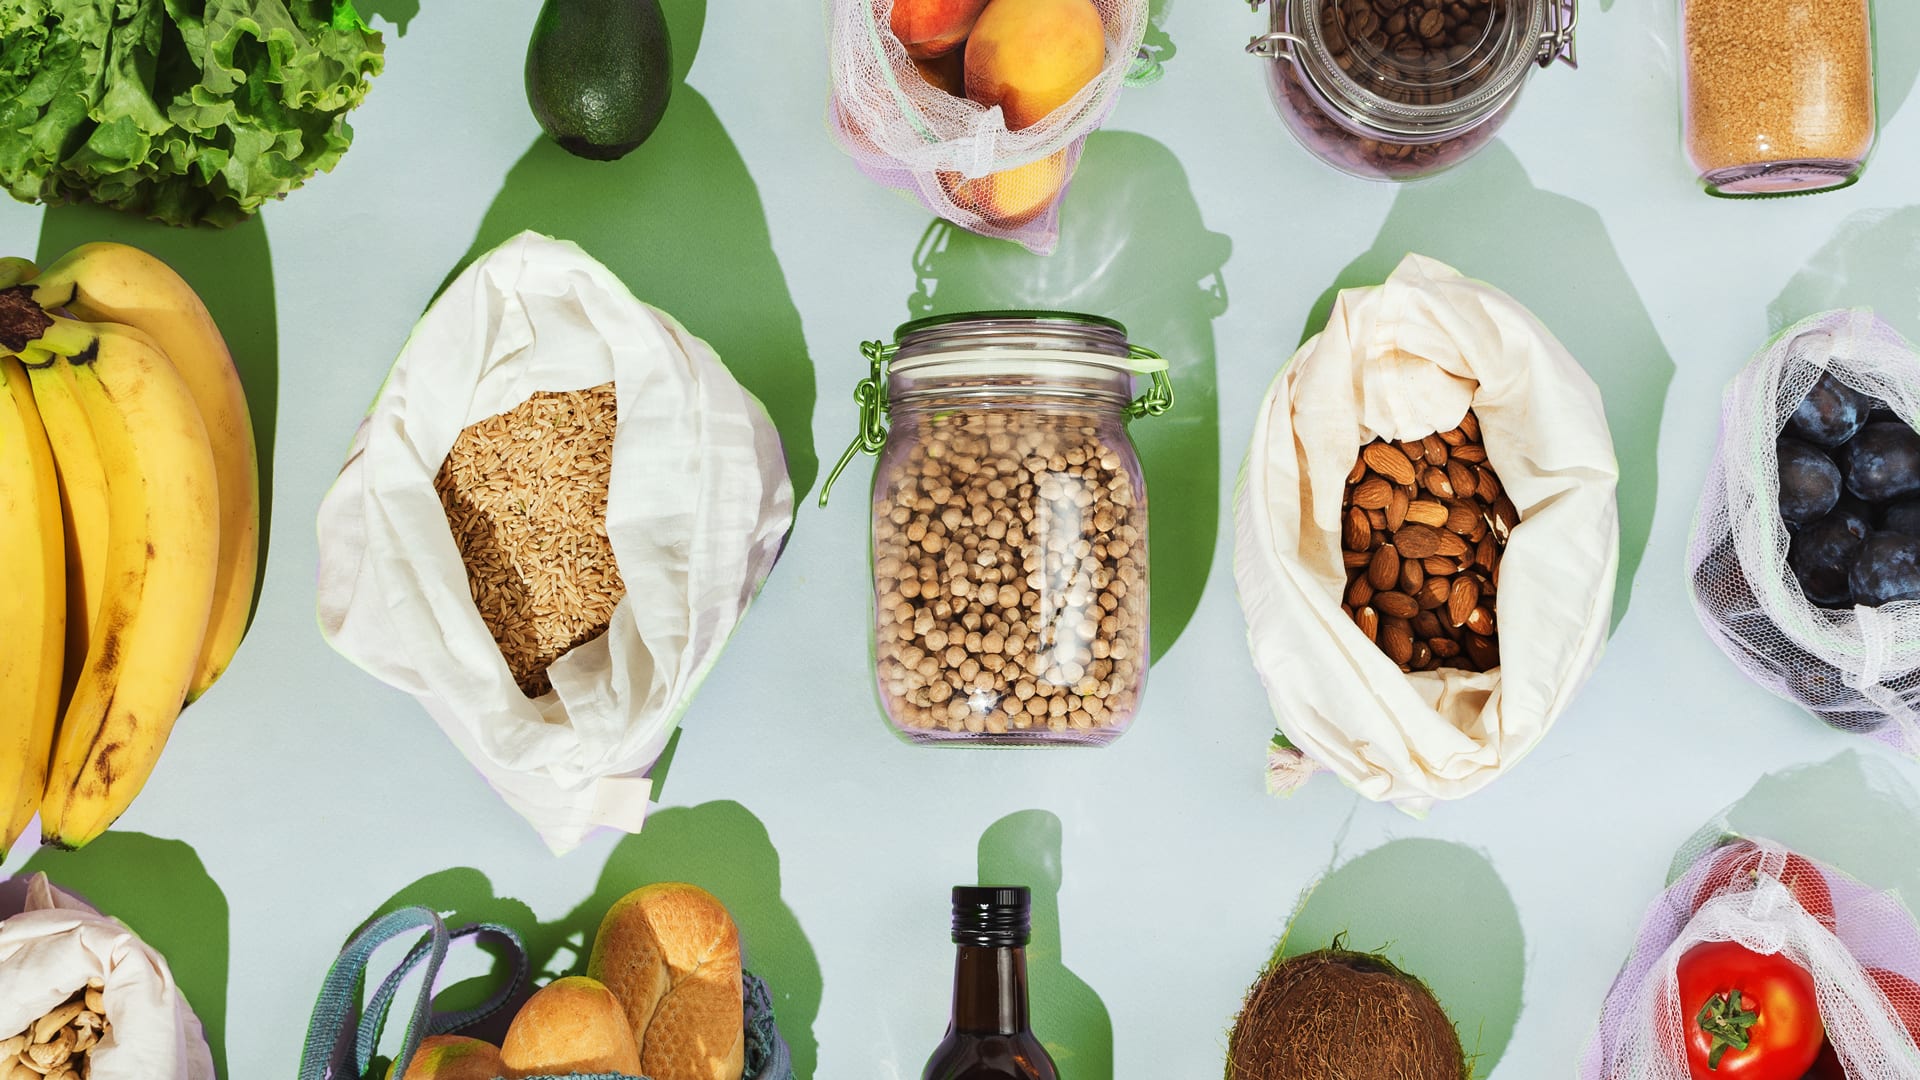 The most potent medicine for mental health might be in your pantry